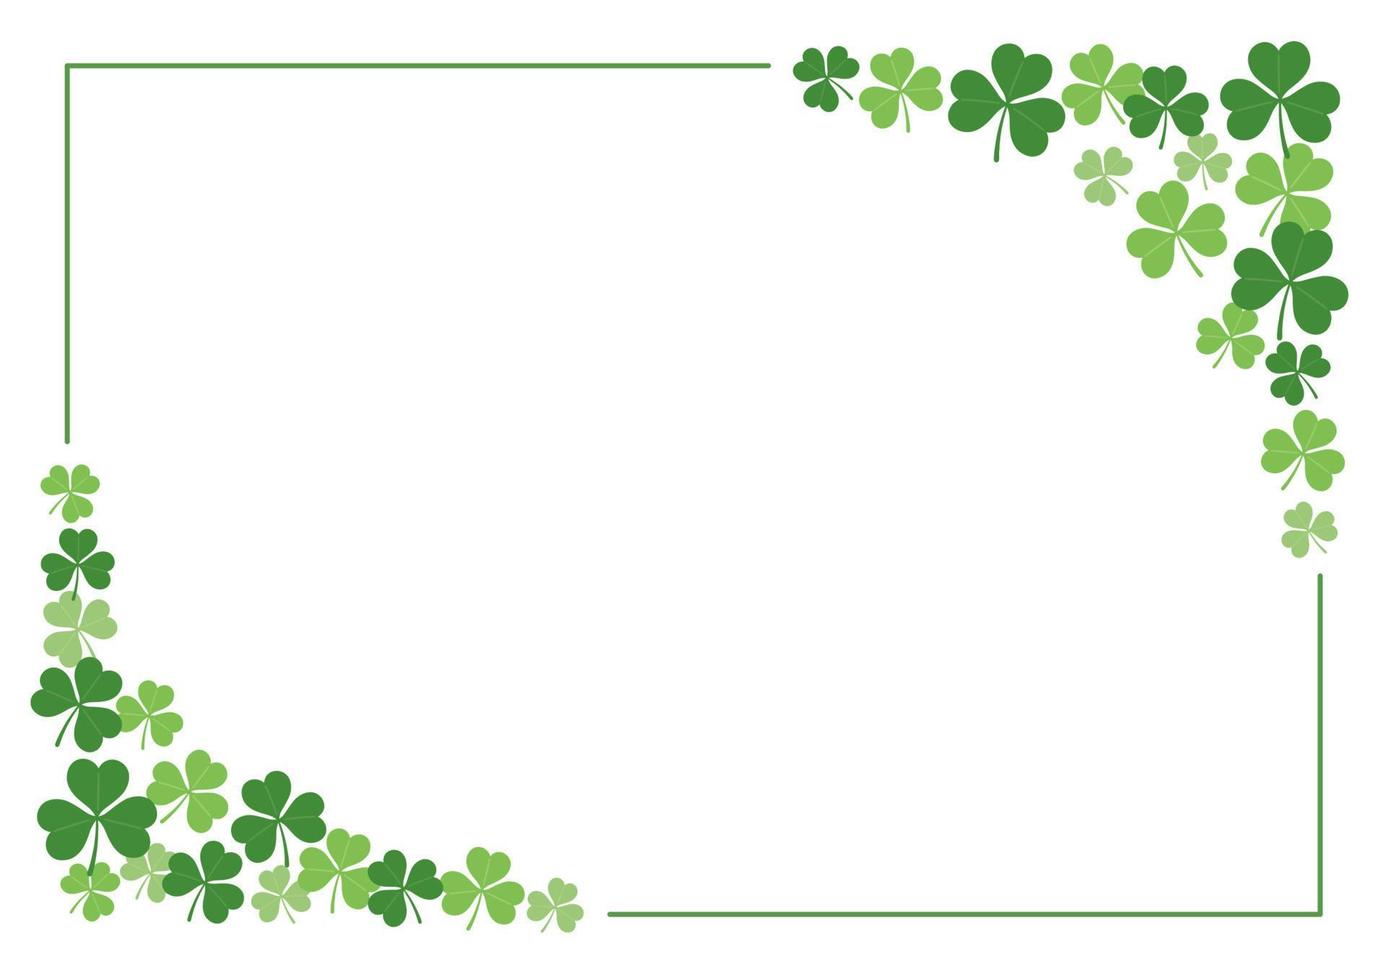 Vector Rectangle Clover Frame Illustration For St. Patricks Day Isolated On a White Background With Text Space.